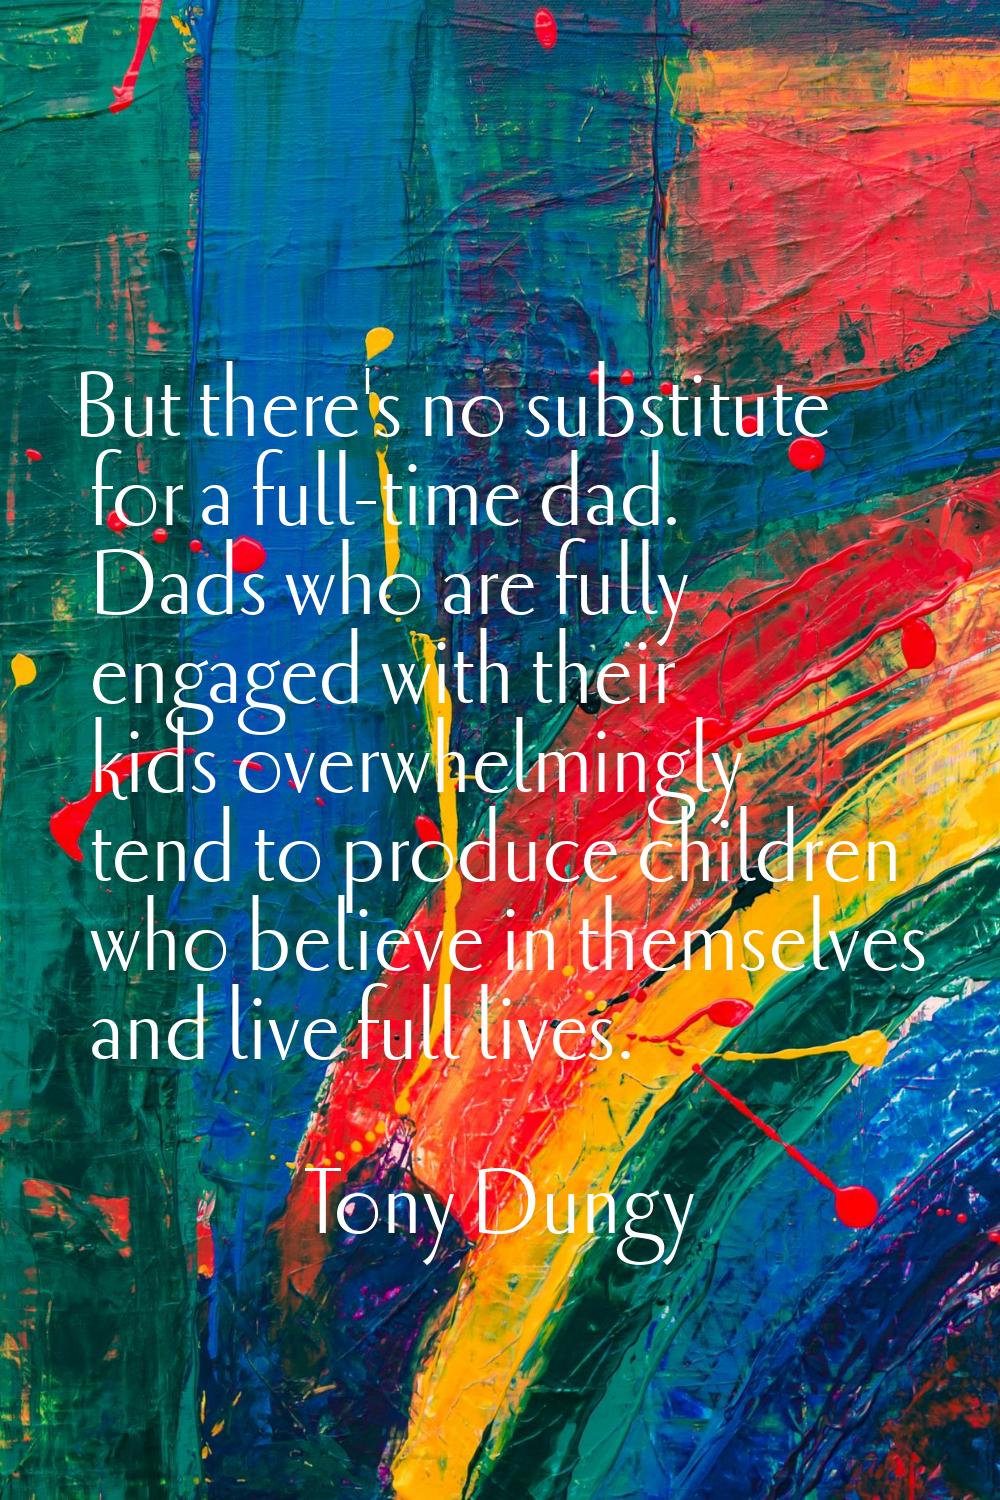 But there's no substitute for a full-time dad. Dads who are fully engaged with their kids overwhelm